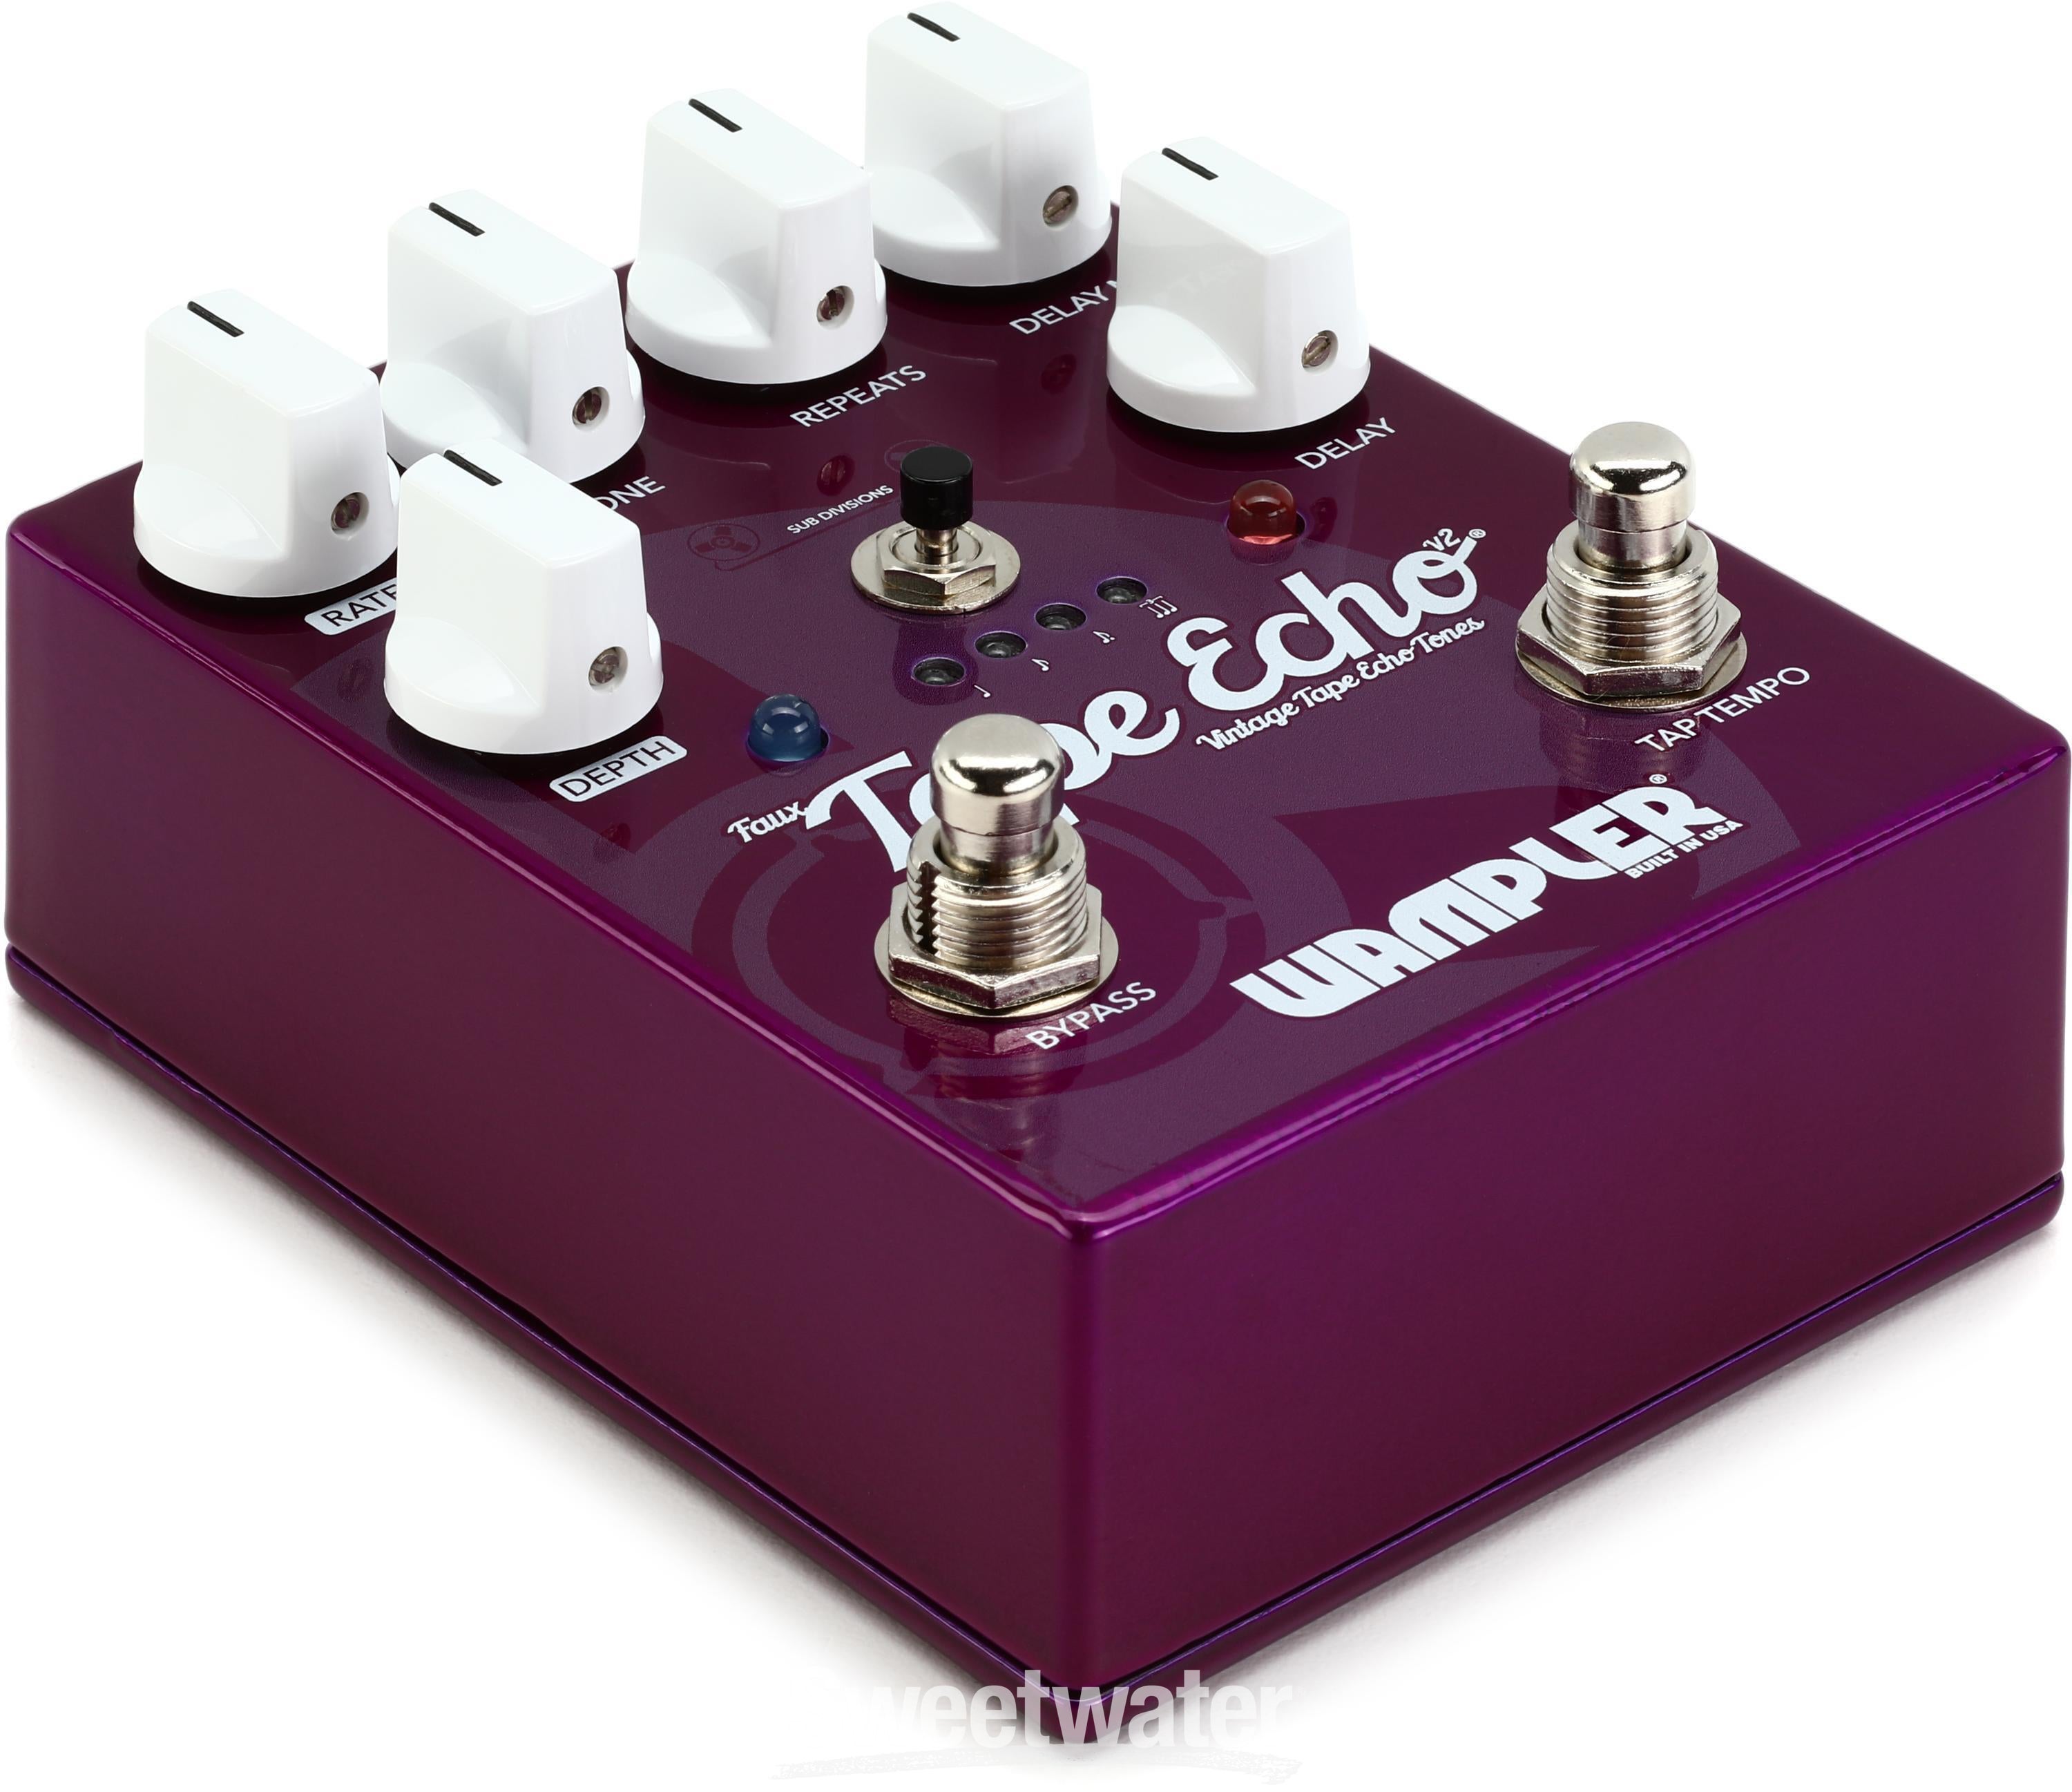 Wampler Faux Tape Echo V2 Delay Pedal Reviews | Sweetwater